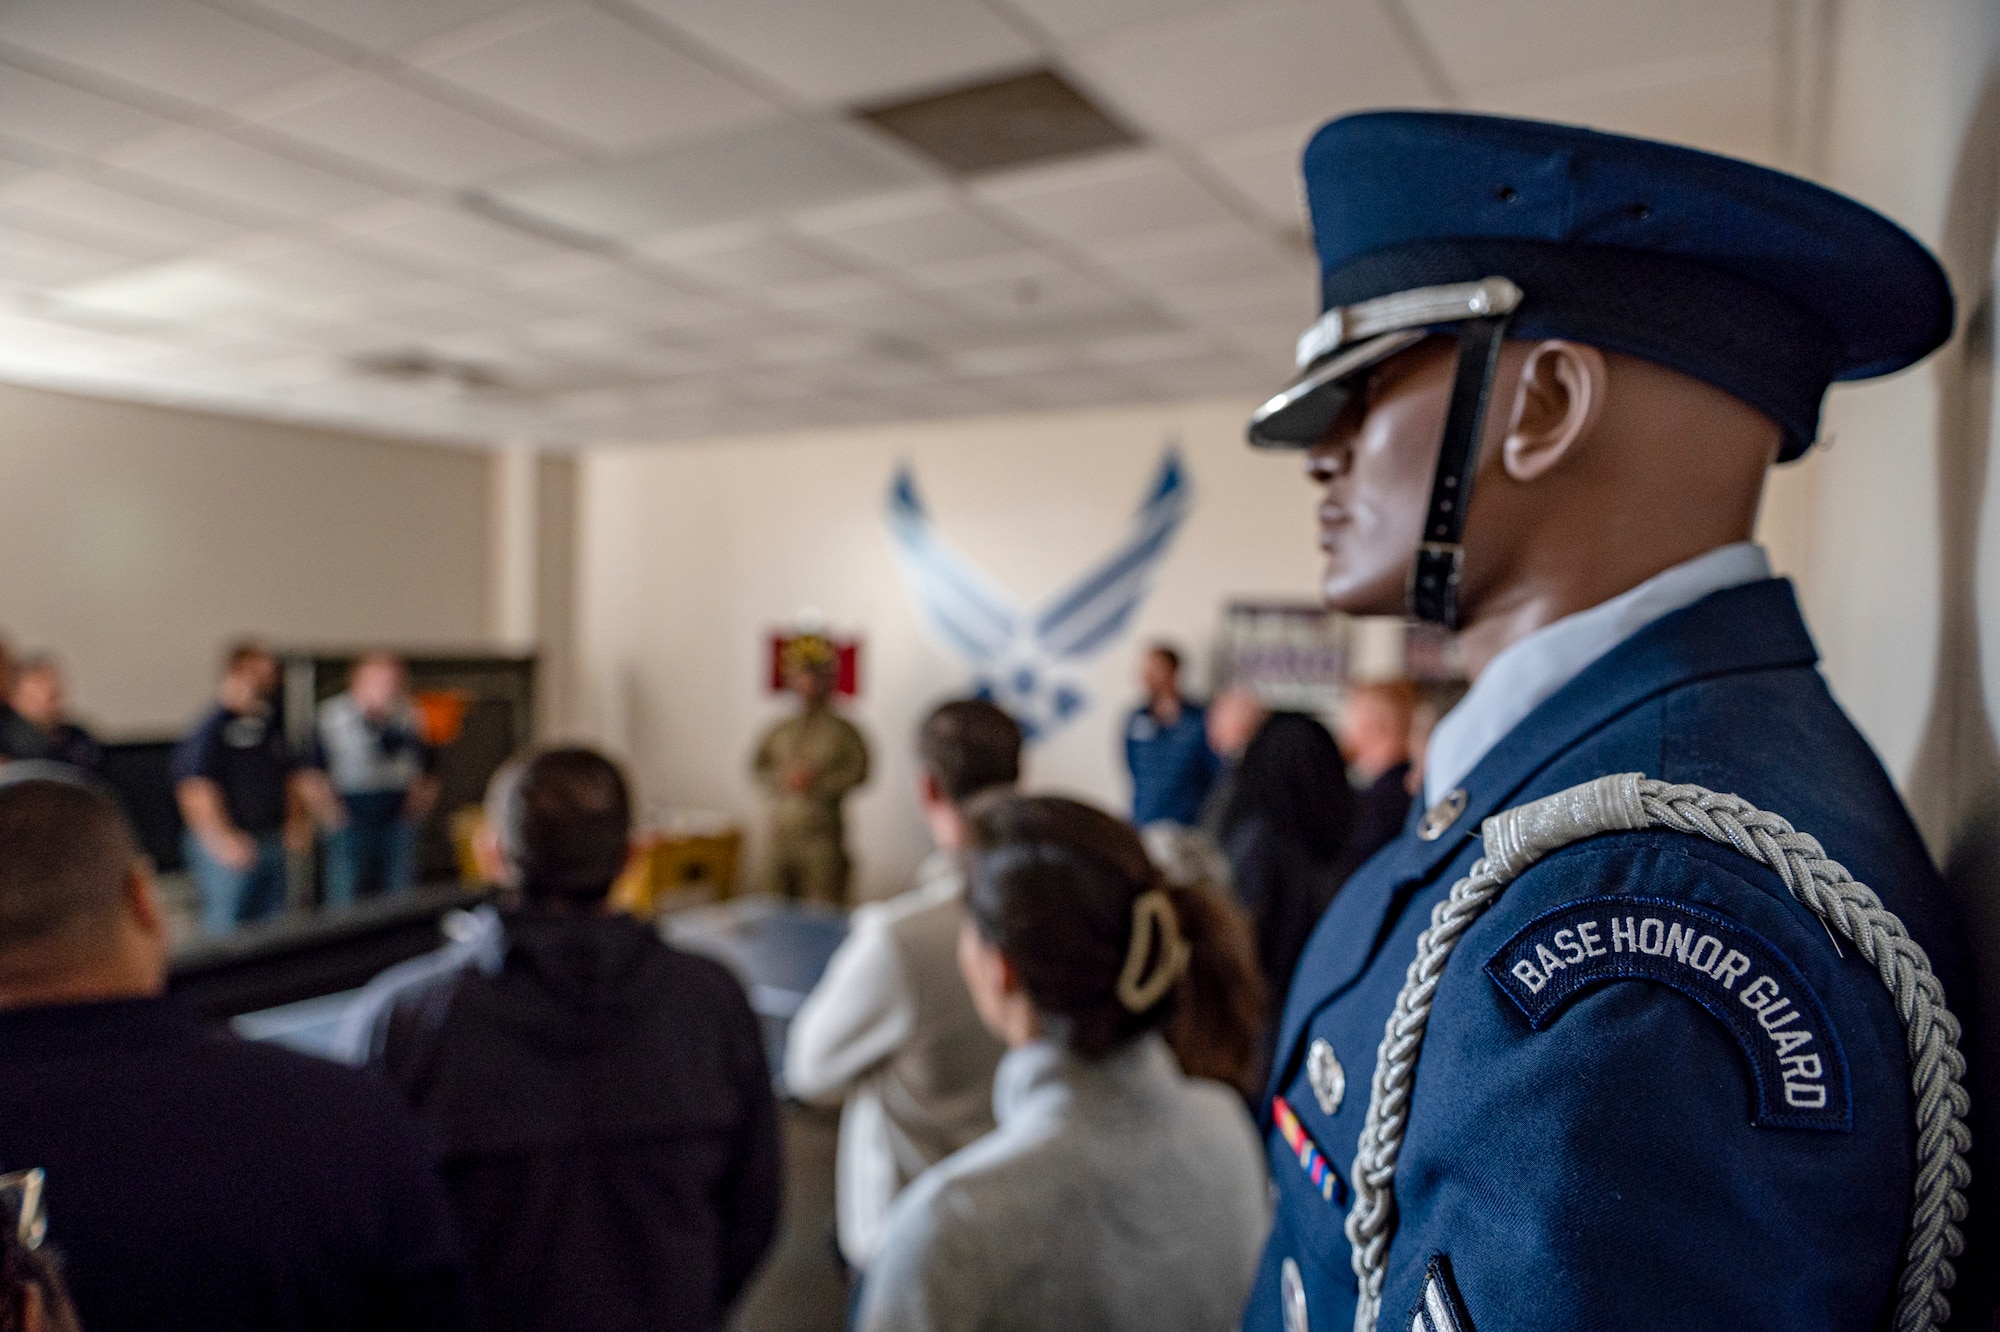 The Leadership Lowndes class of 2024 visits the Base Honor Guard facility at Moody Air Force Base, Georgia, March 21, 2024. Strengthening relationships between Moody and the Lowndes County community allows both organizations to learn about shared interests and opportunities. (U.S. Air Force photo by Airman 1st Class Leonid Soubbotine)